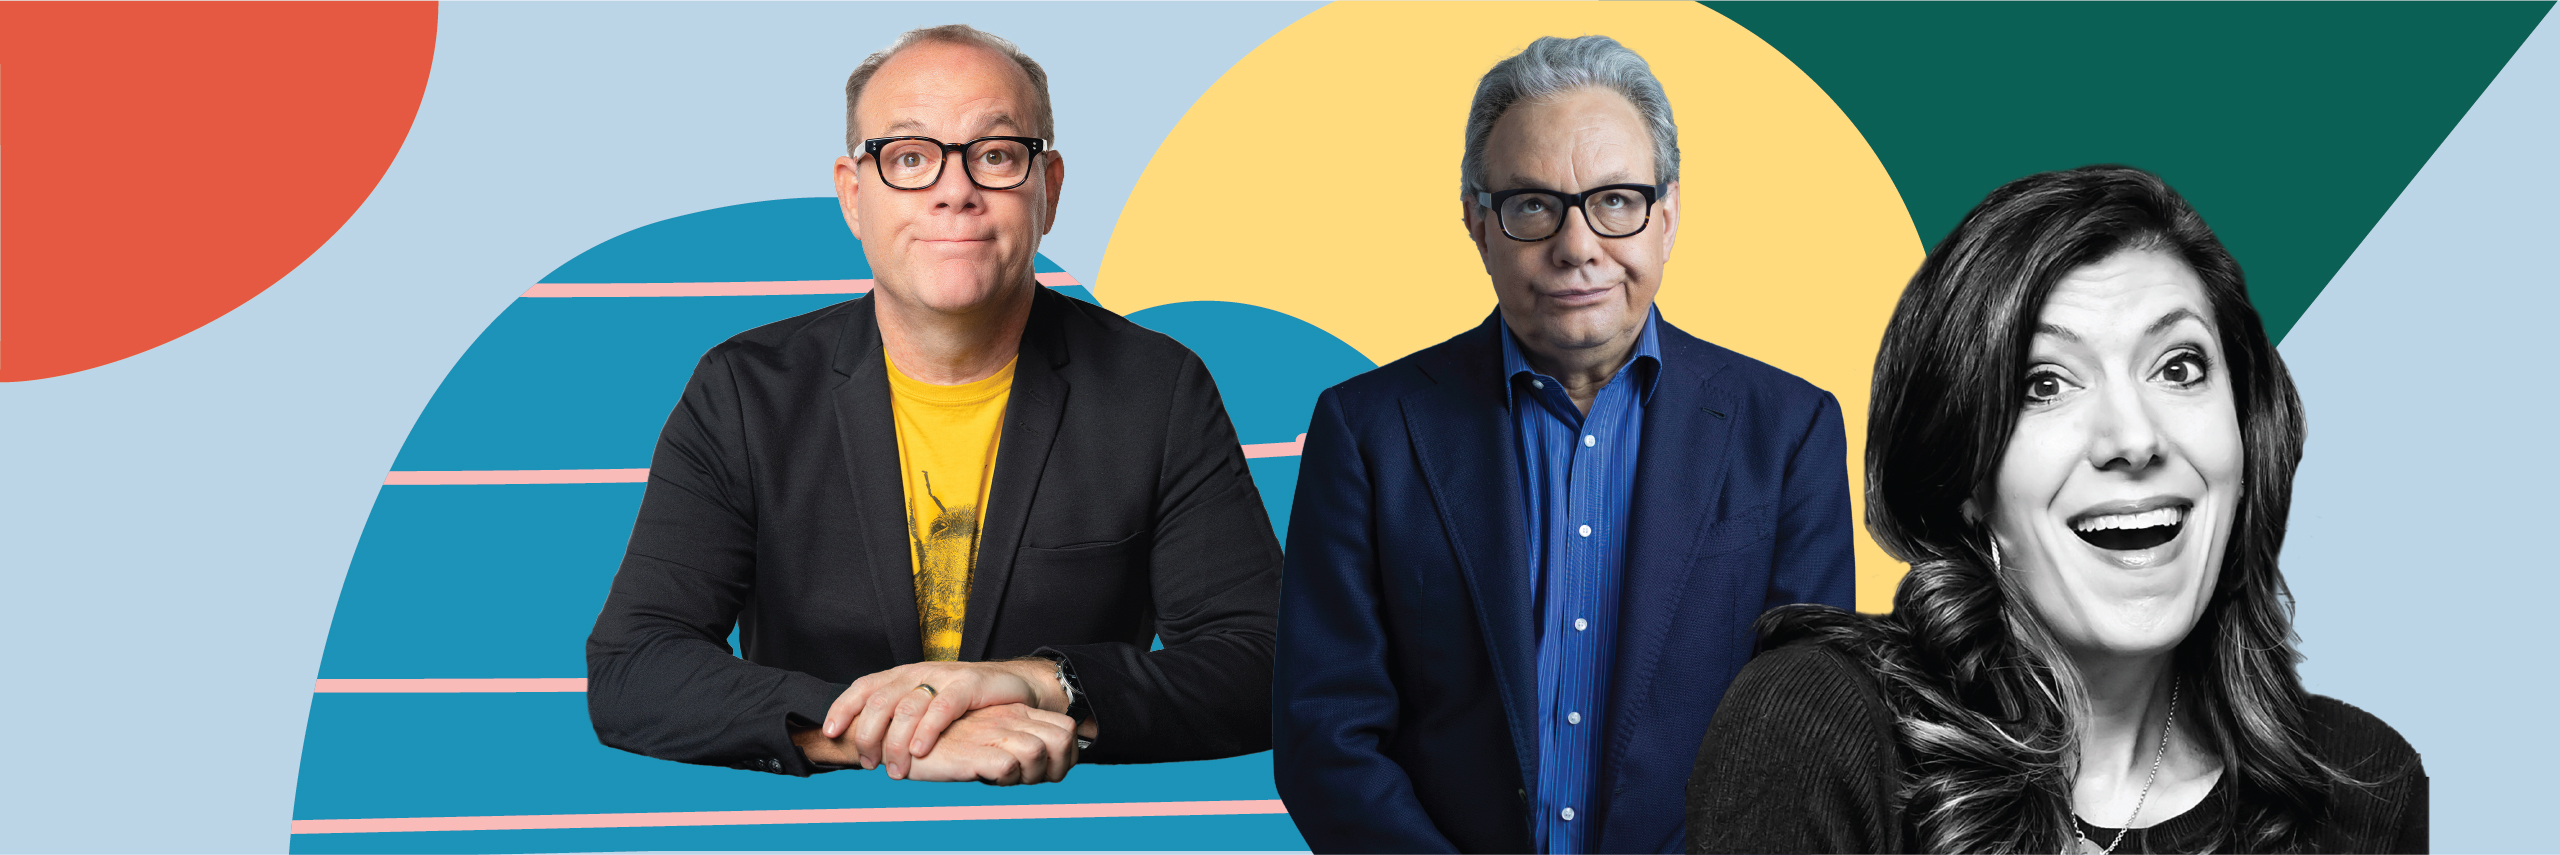 A colorful collage with Tom Papa, Lewis Black and Dena Blizzard.